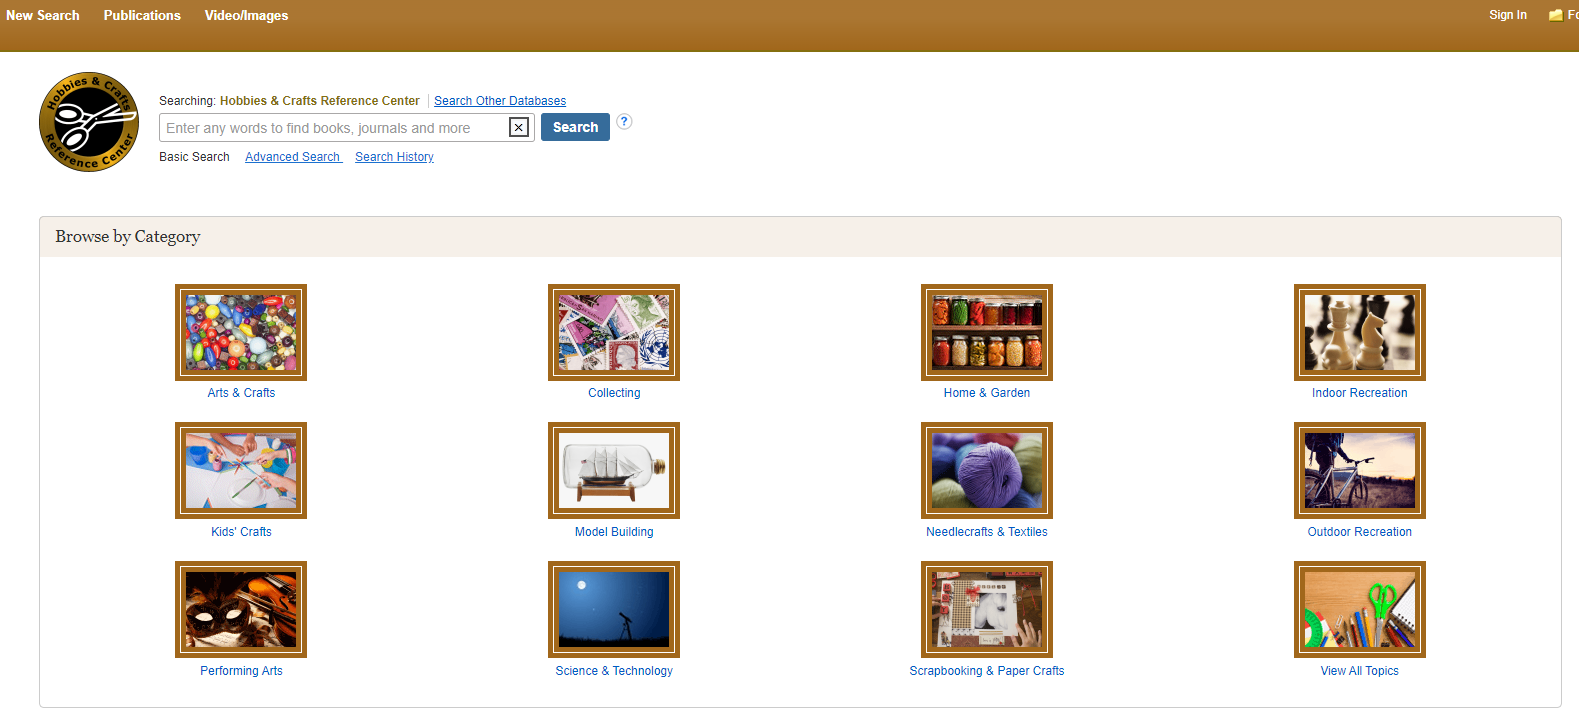 Hobby and Craft Reference Centre home page